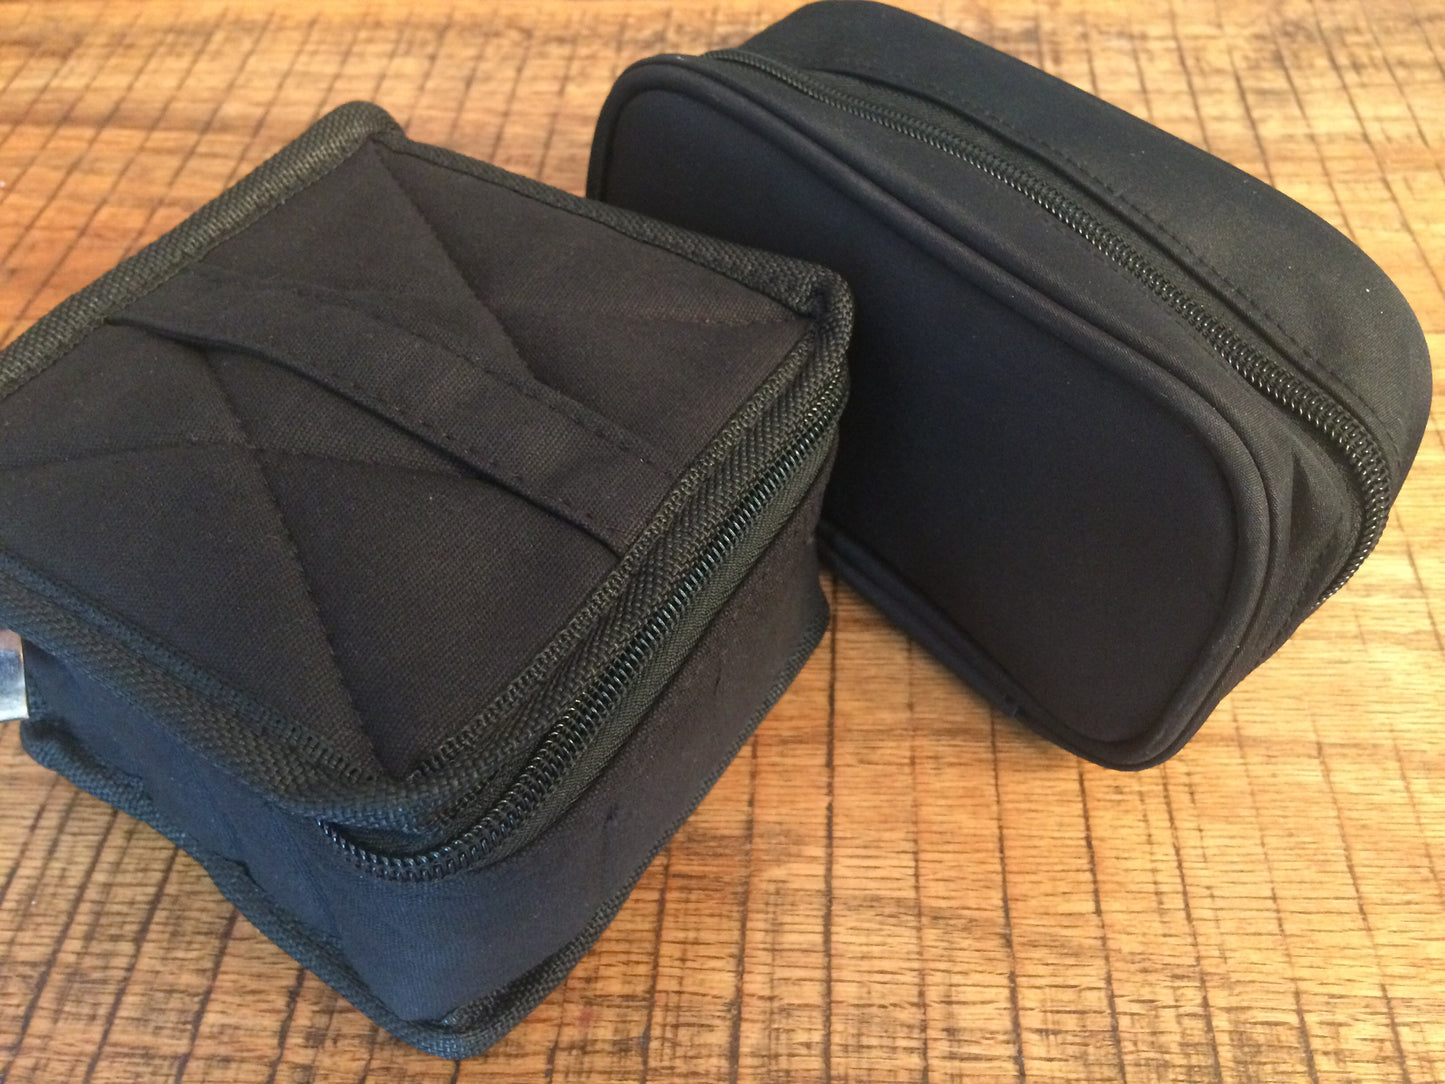 Essential oil travel and storage pouch